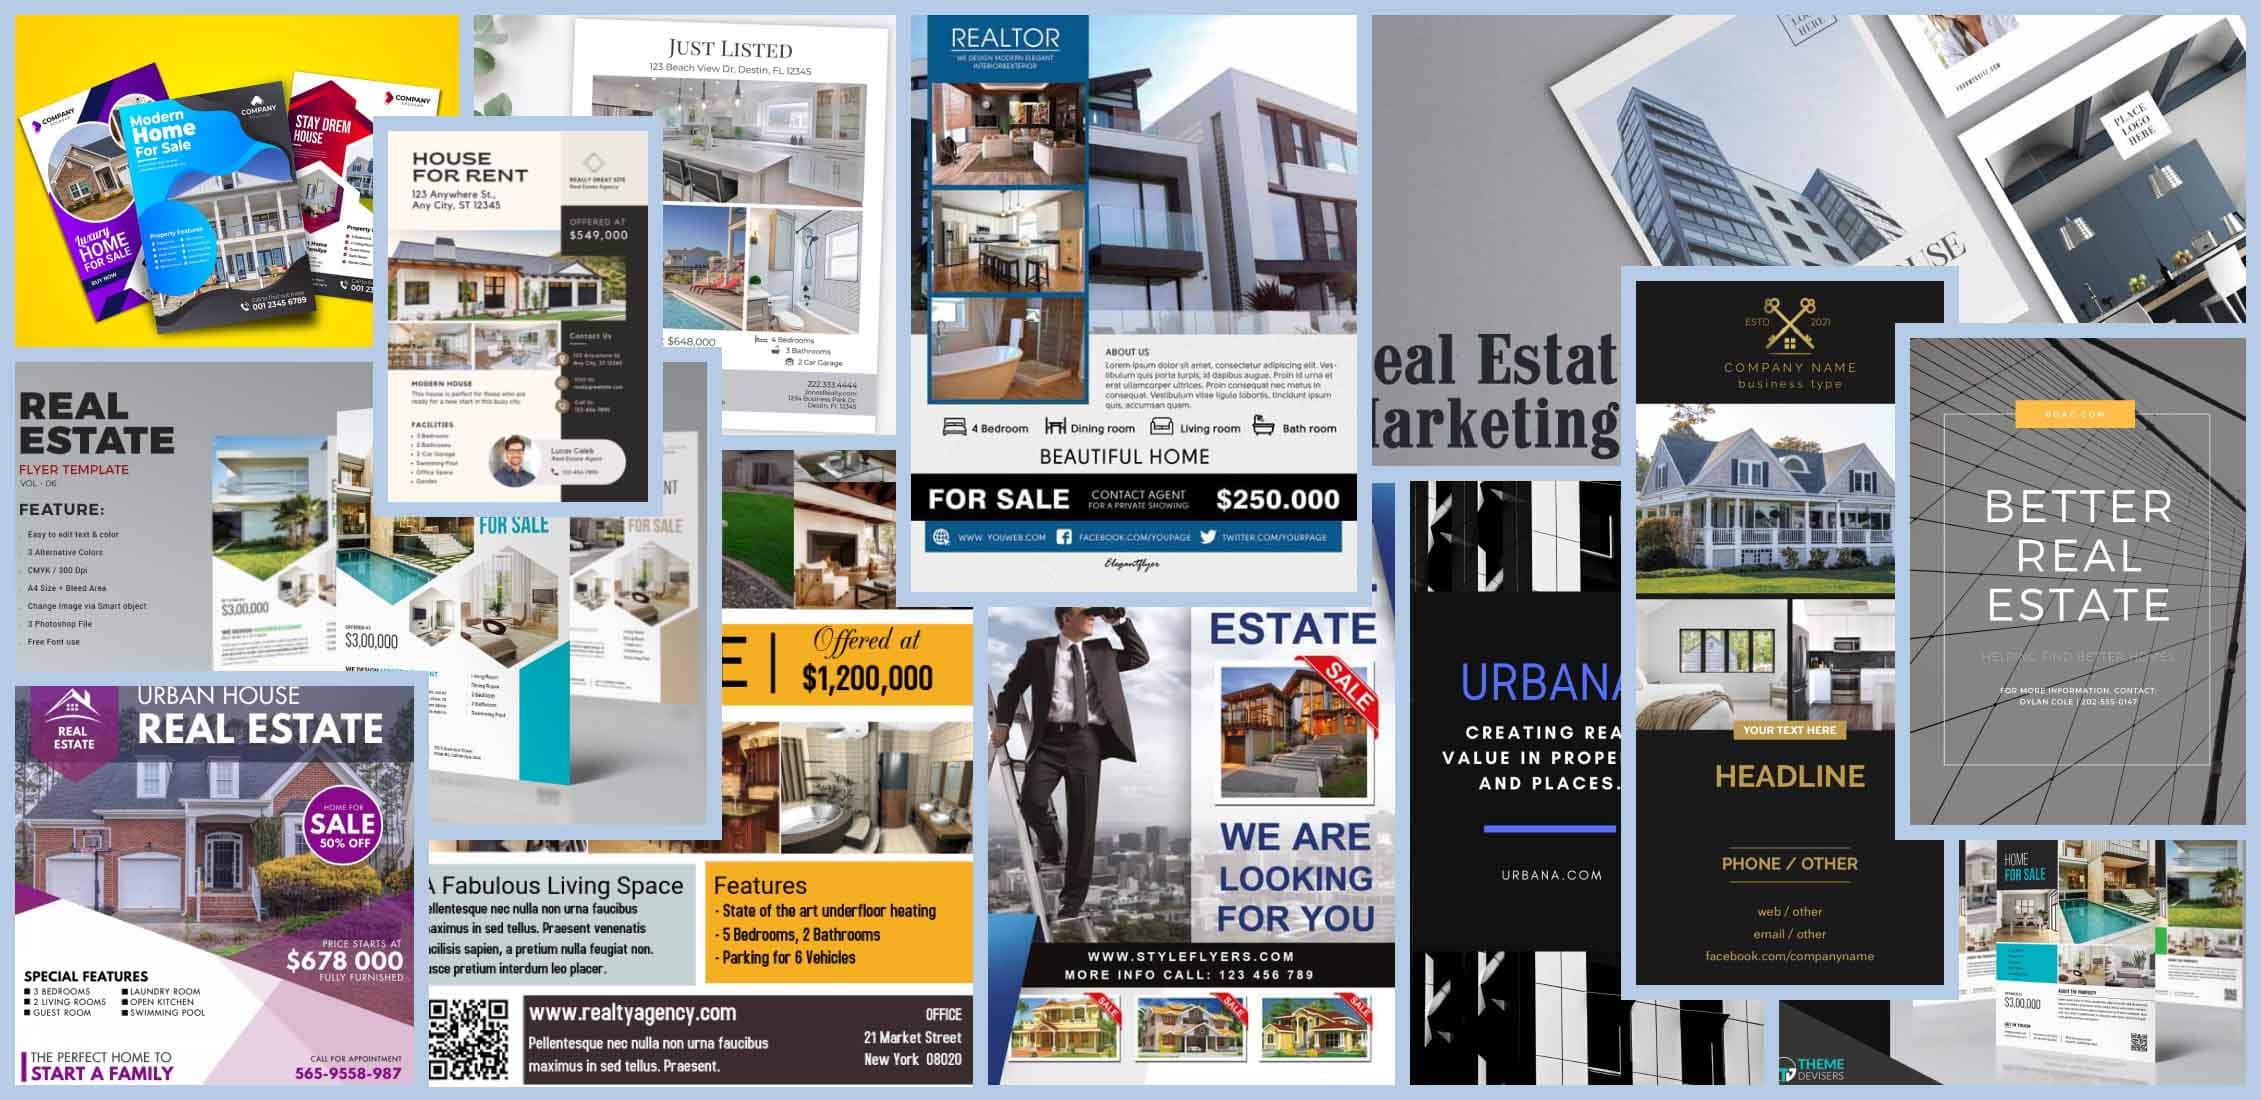 real estate flyers Example.